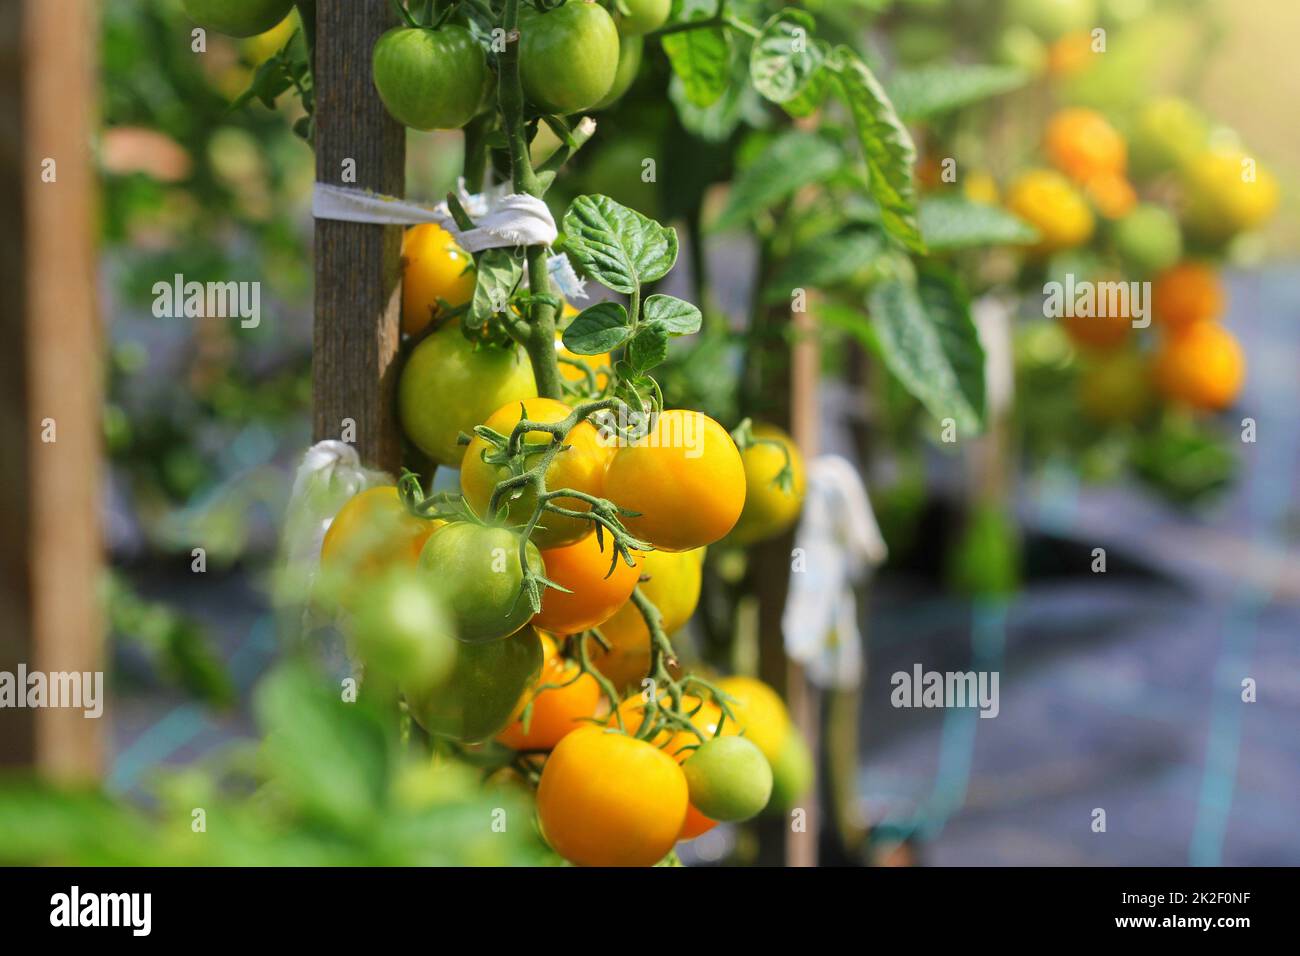 Yellow tomatoes ripen on a branch in the garden. Variety yellow tomatoes Stock Photo